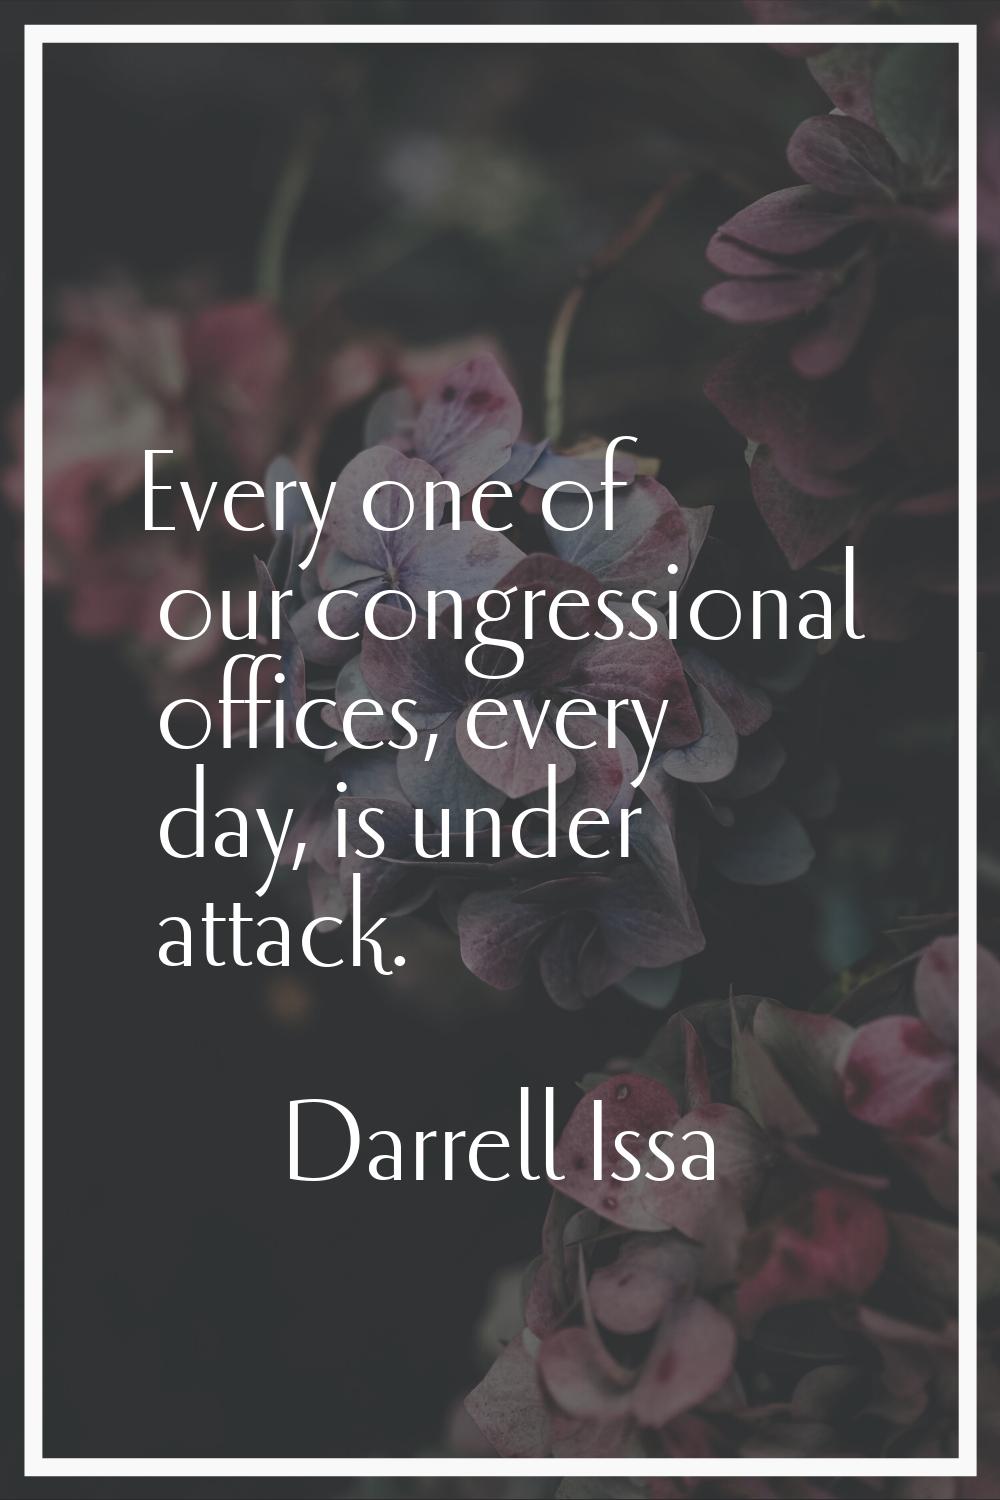 Every one of our congressional offices, every day, is under attack.